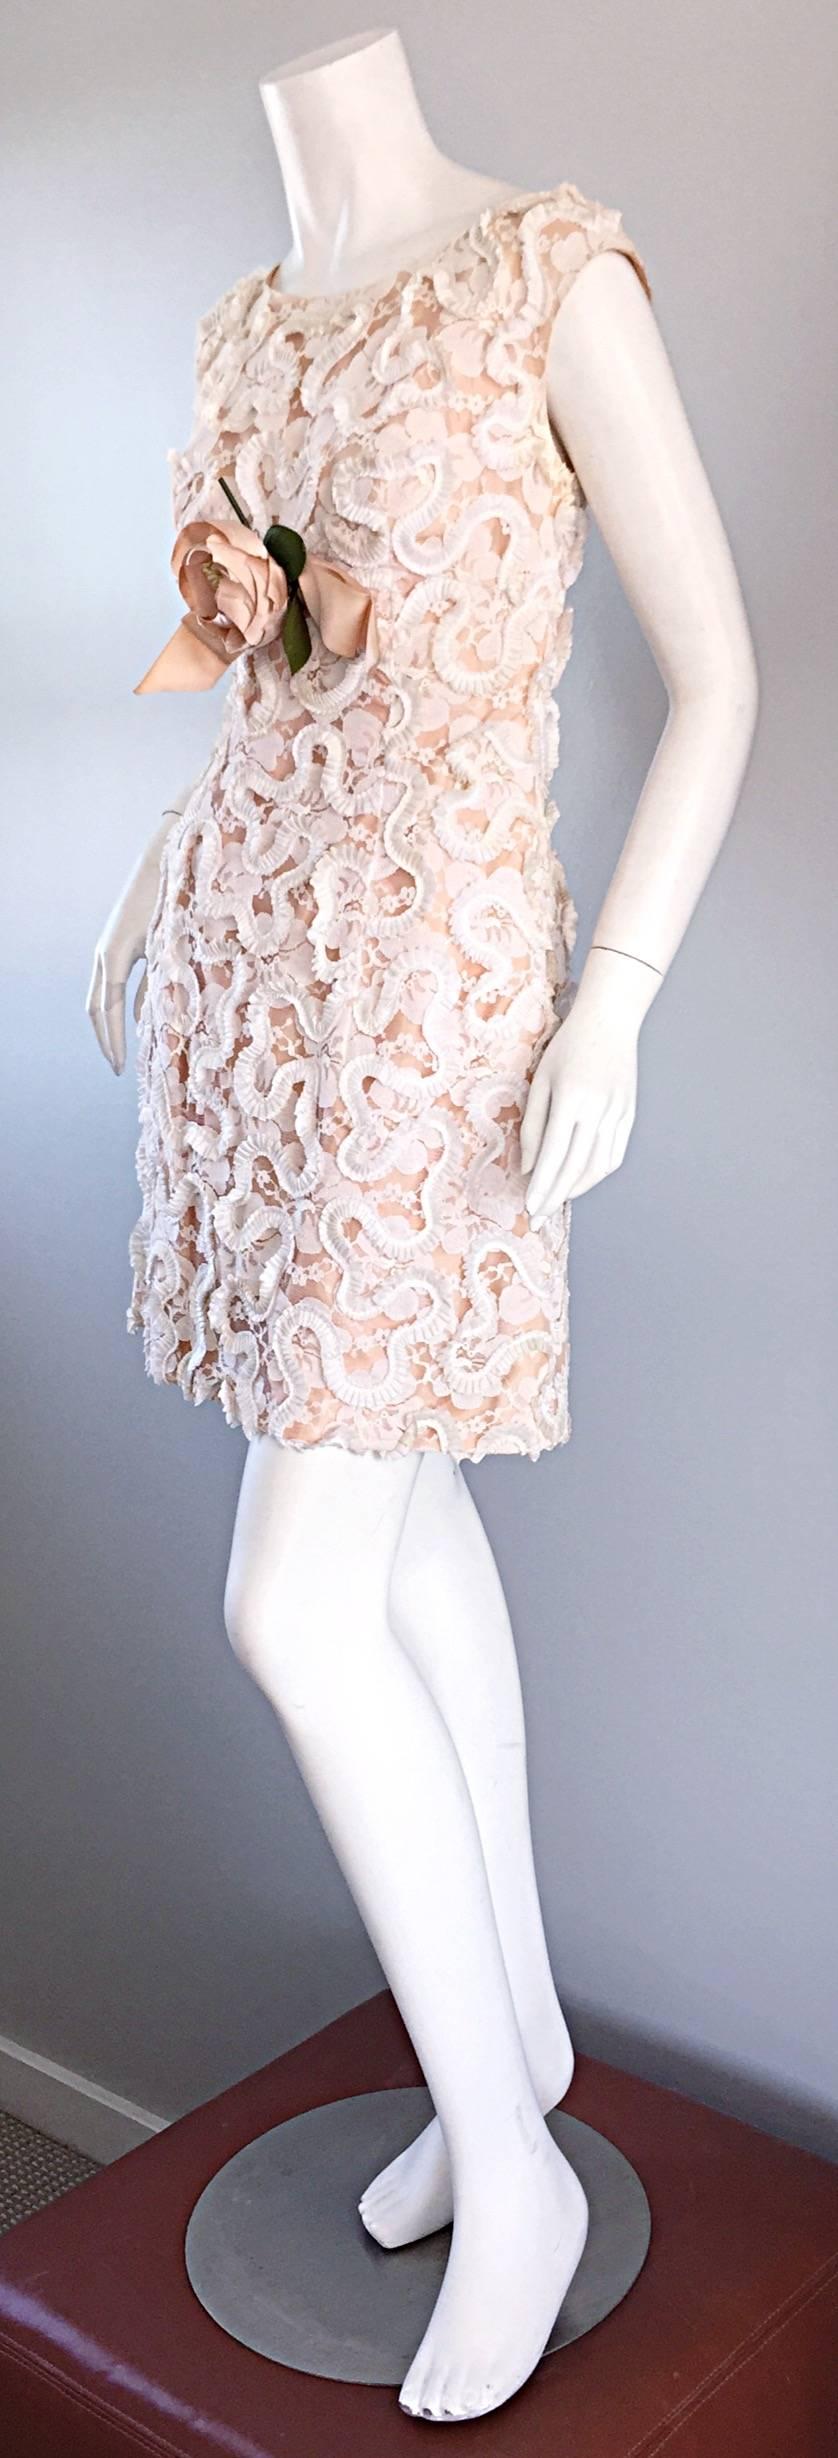 Cutest 1960s vintage A-Line mini dress! Intricate lace detail throughout, with pink silk bow at waist, with a removable flower corsage. Looks amazing on! Fully lined. Looks great with sandals, wedges or heels. Full metal zipper up the back. In great